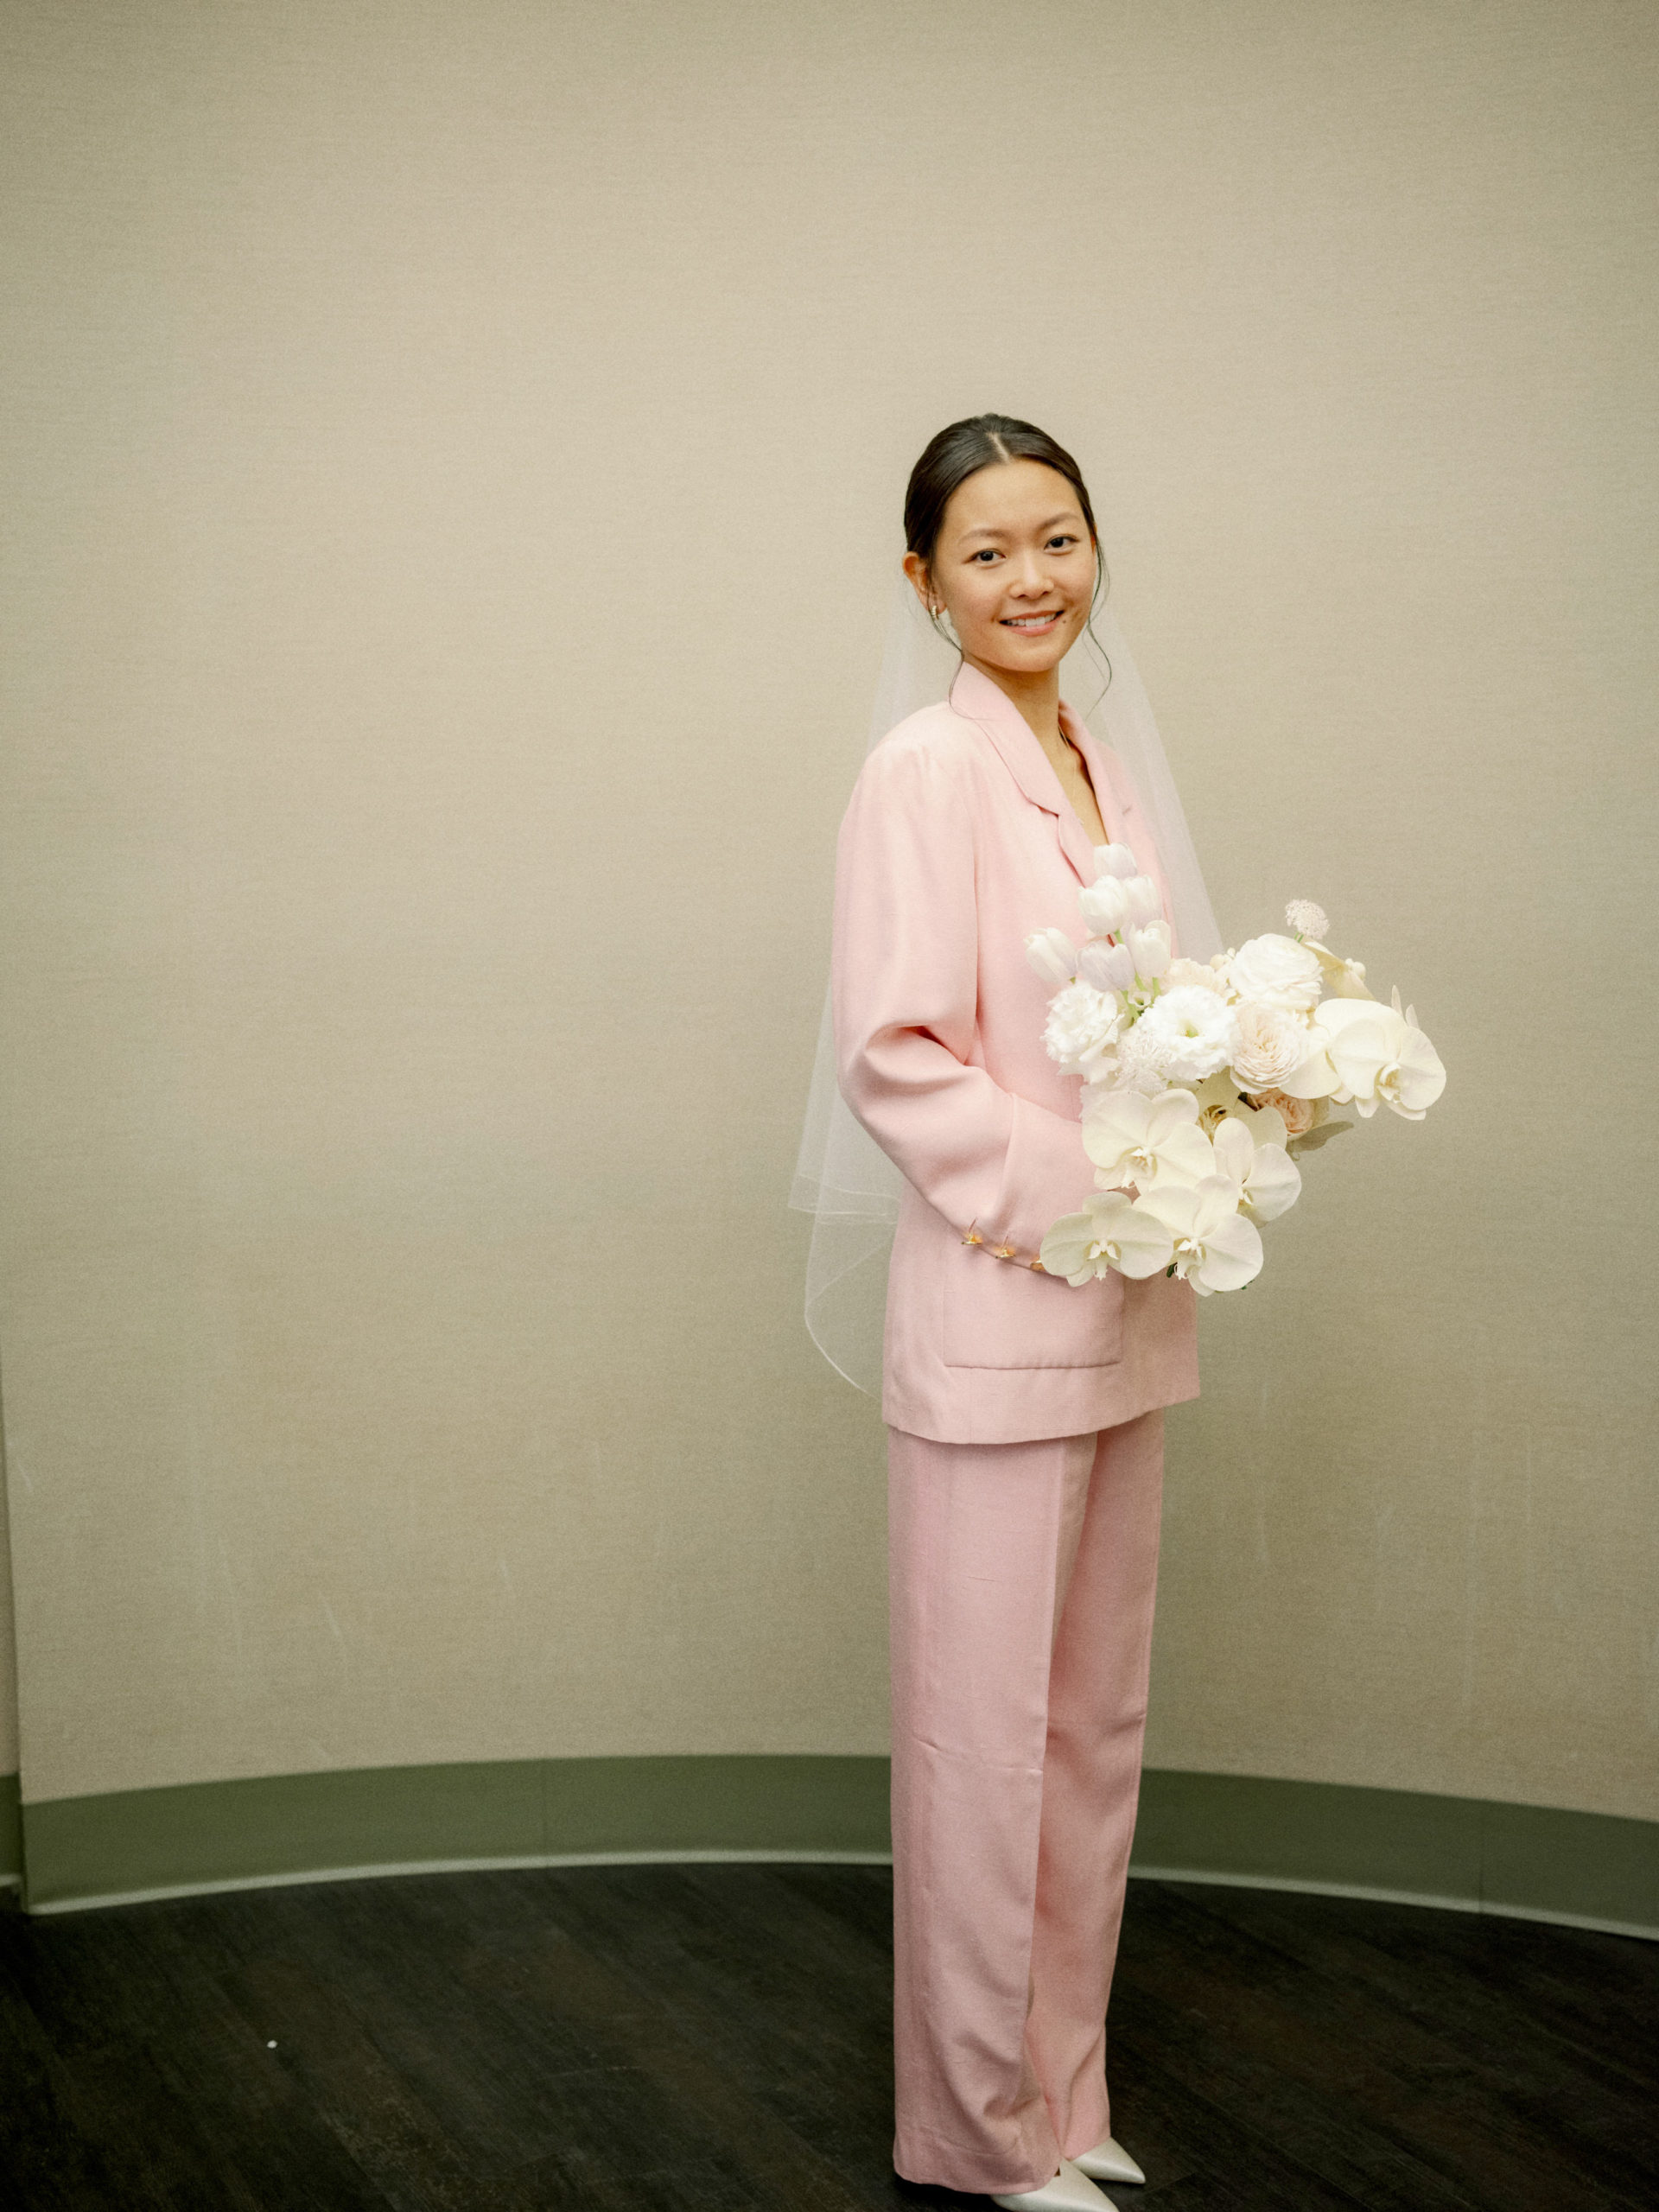 The pretty bride is wearing a baby pink wedding suit for her NYC city hall wedding. Editorial elopement Image by Jenny Fu Studio